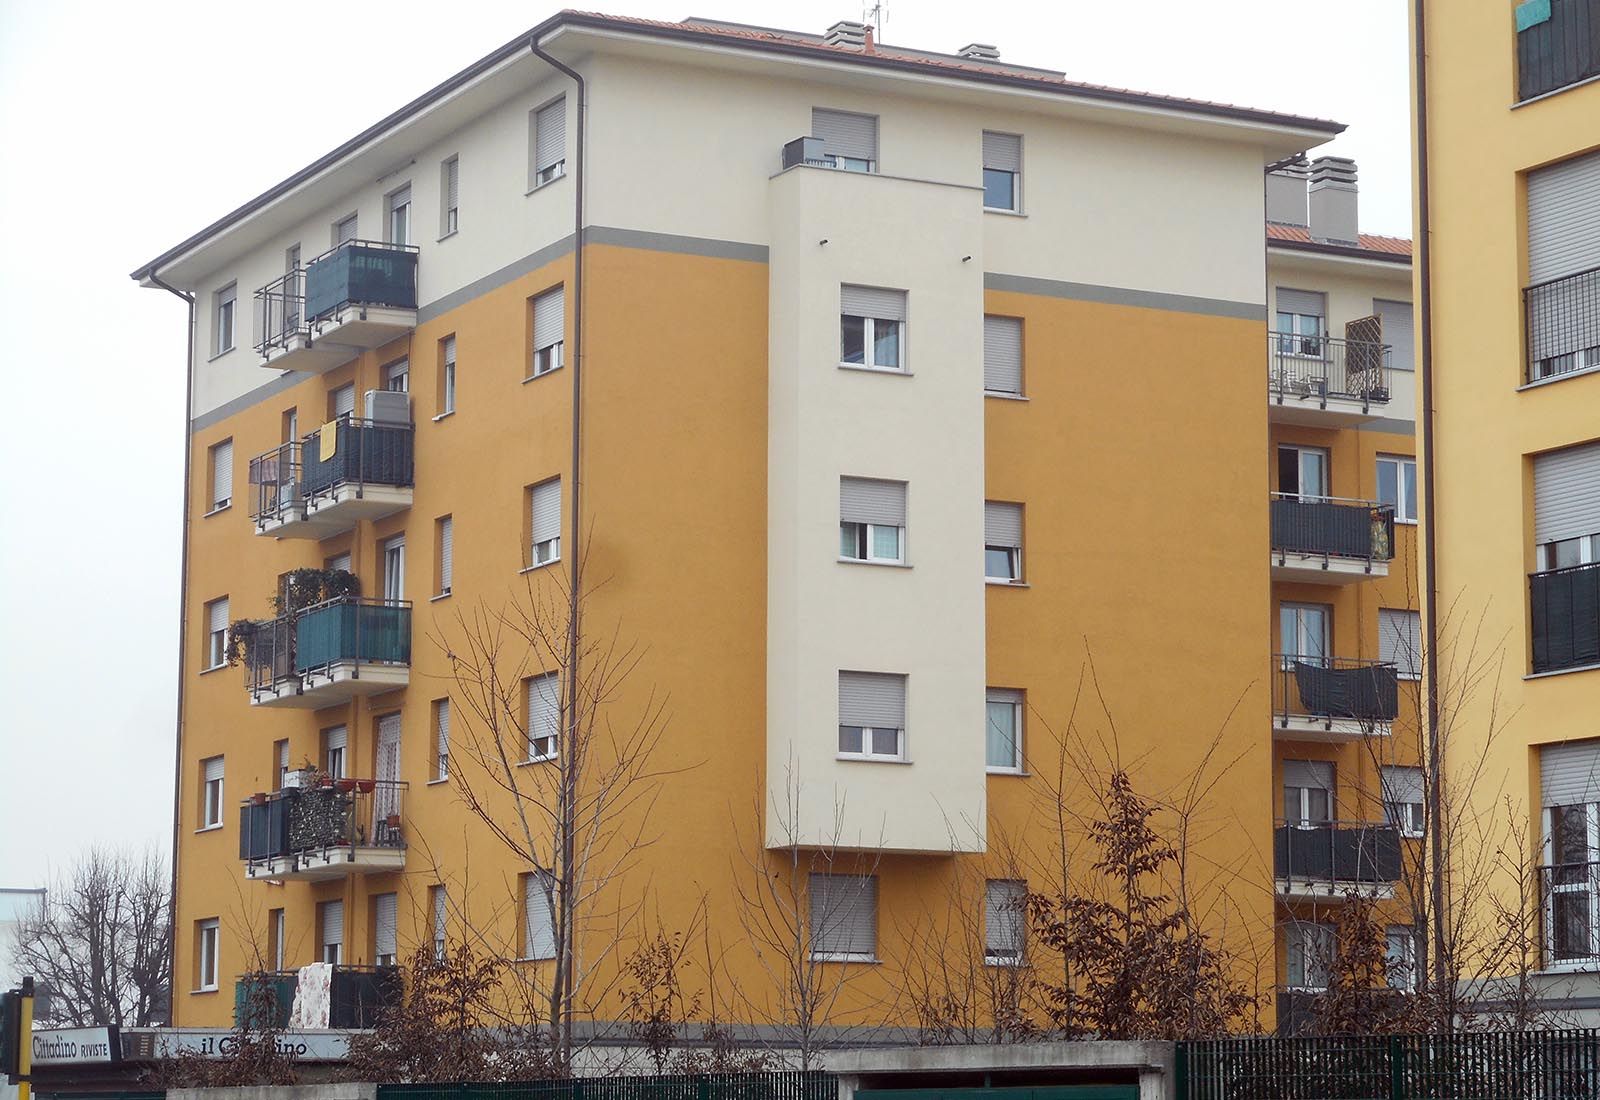 Residential building Aler property in Lissone - View